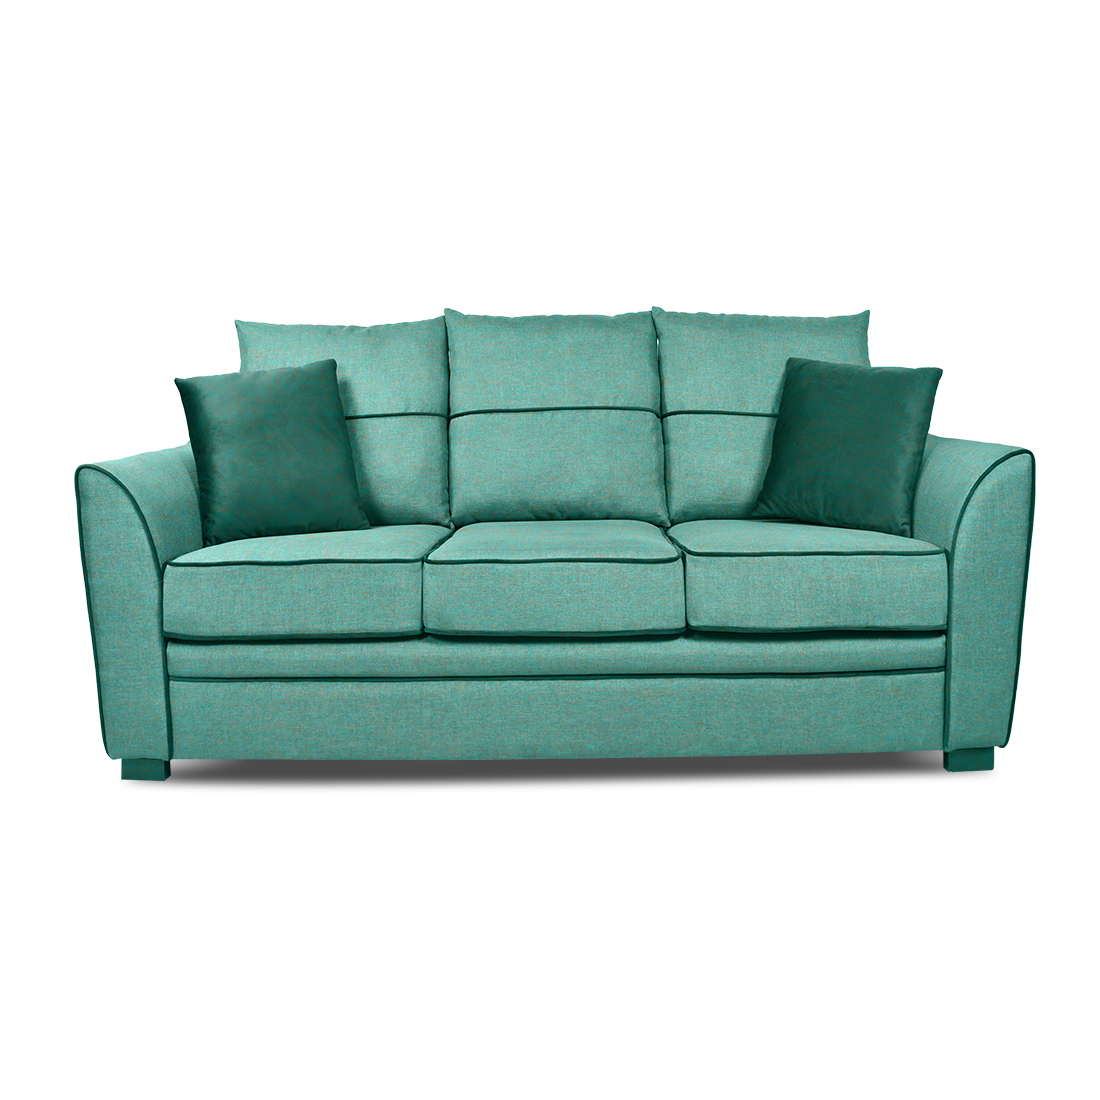 Victoria 3 Seater (Turquoise Green)